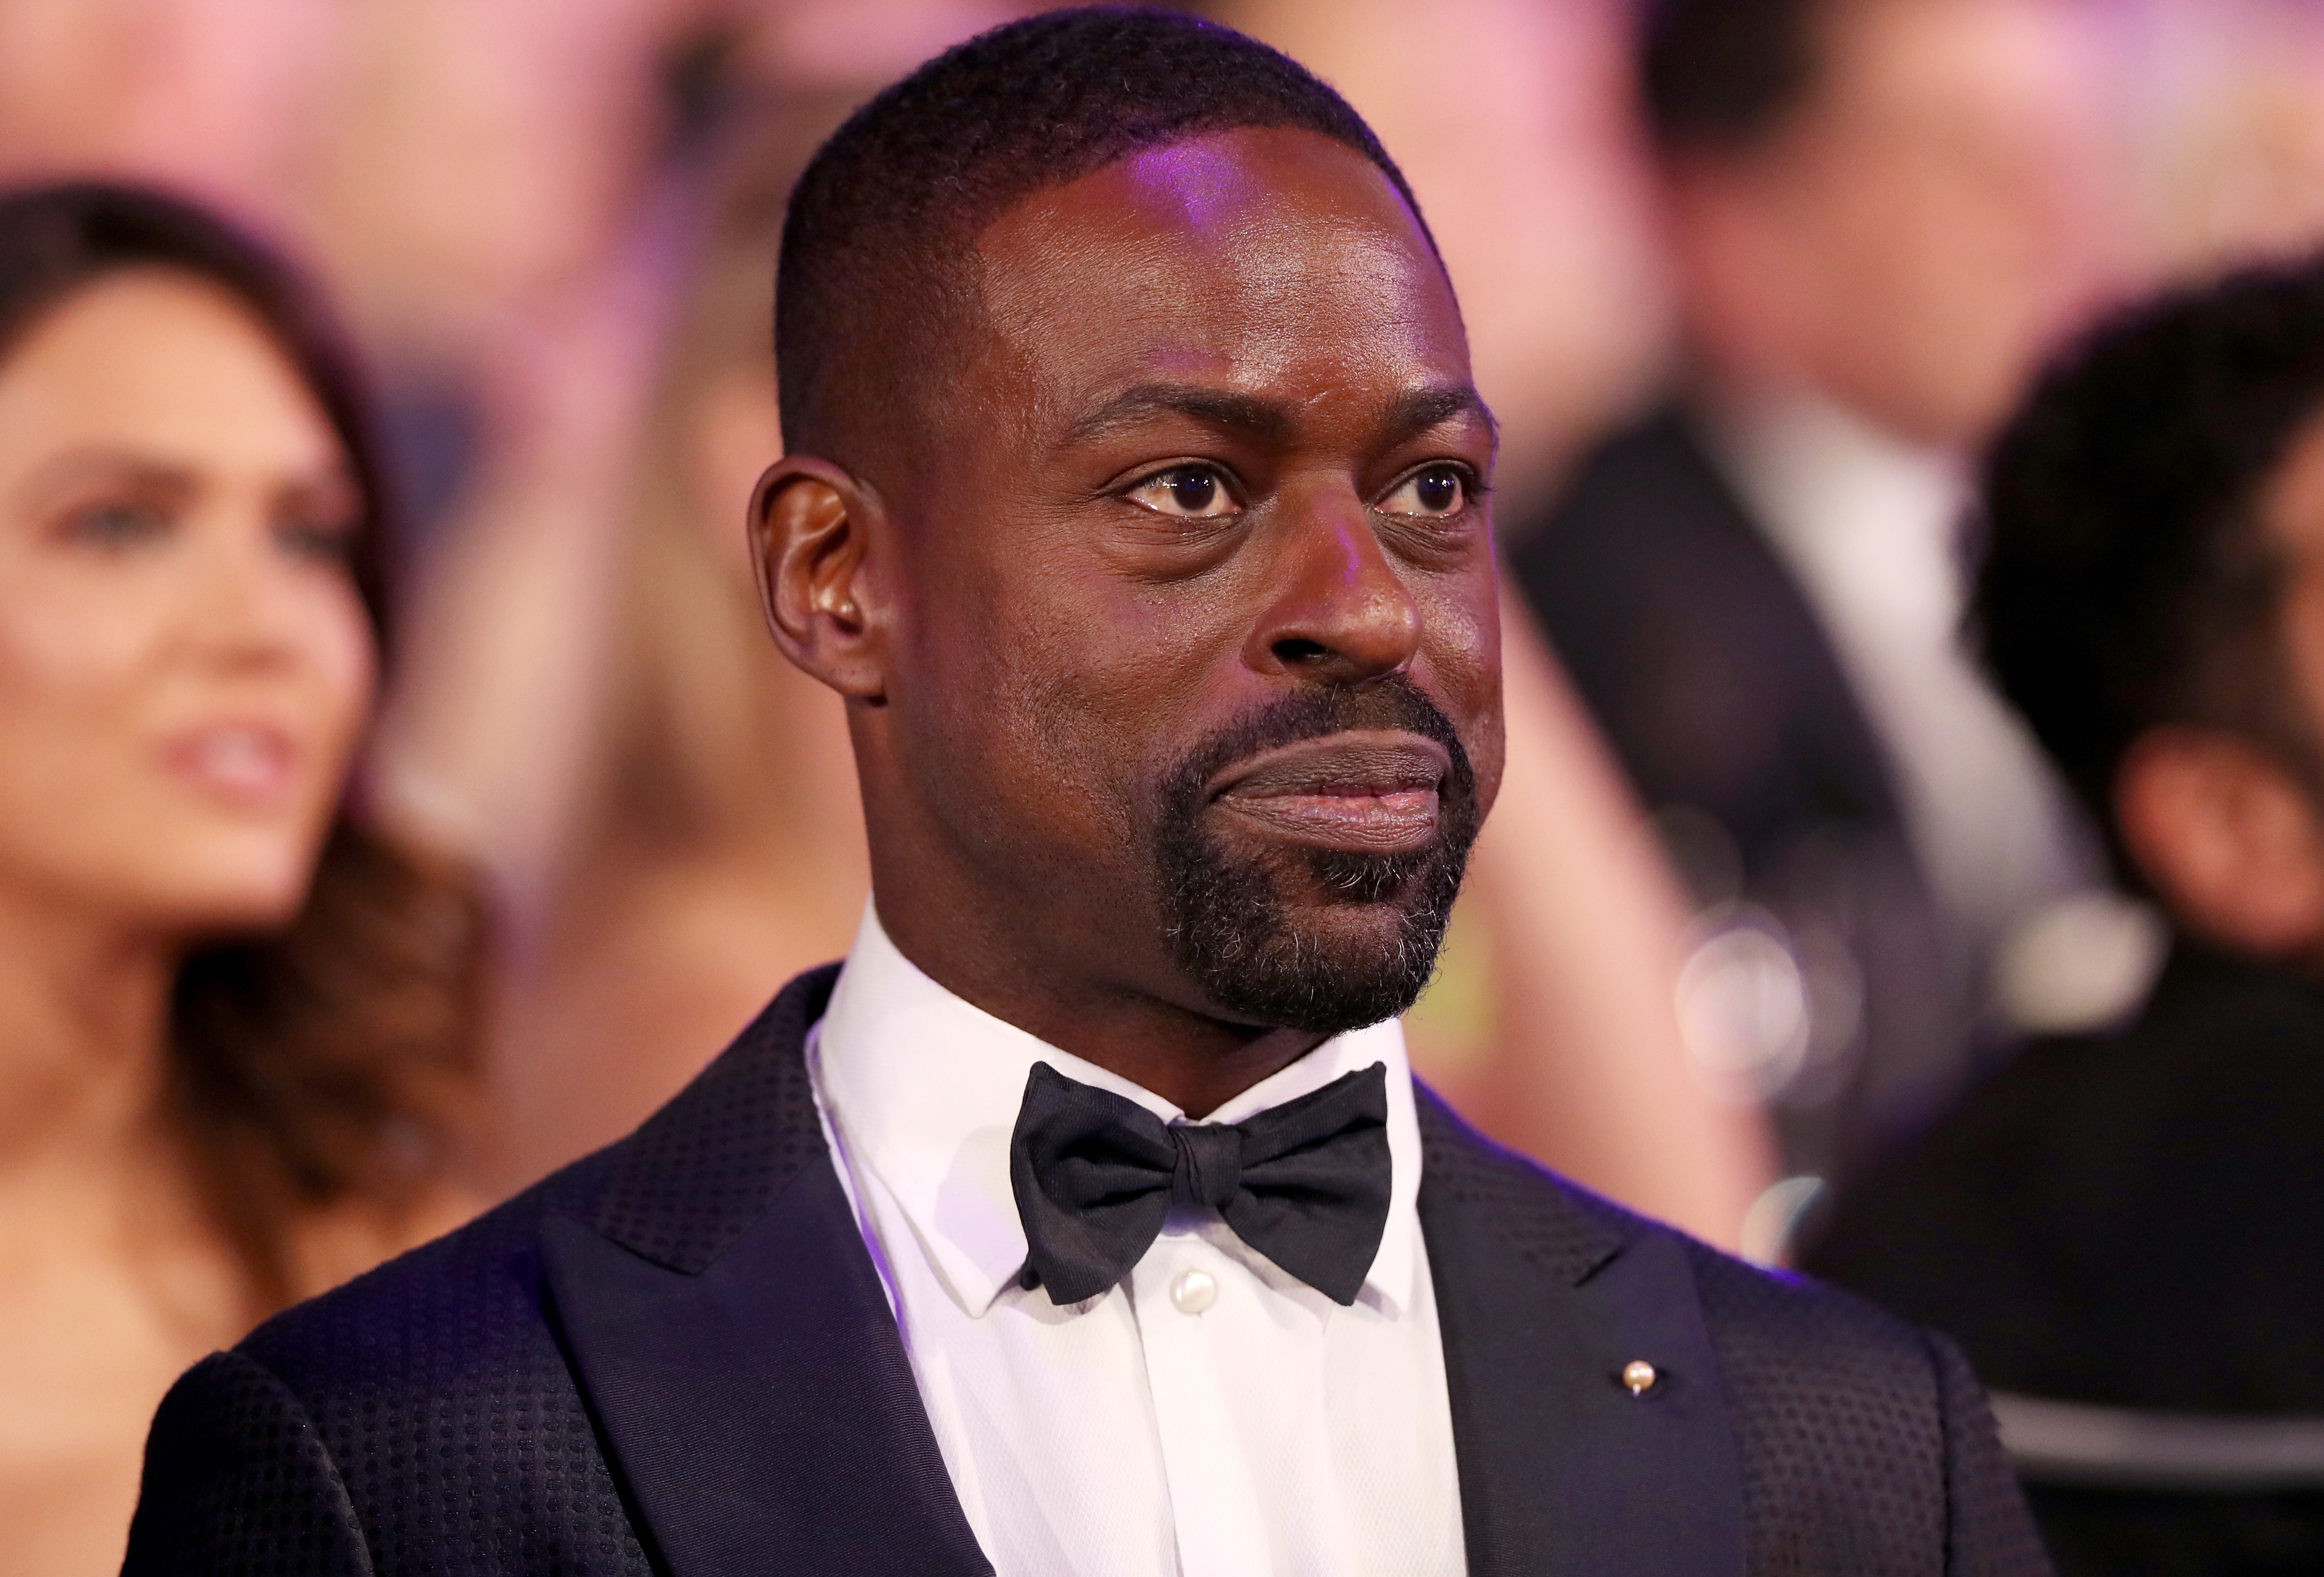 Sterling K. Brown attends the 24th Annual Screen Actors Guild Awards at The Shrine Auditorium on January 21, 2018 | Photo: GettyImages